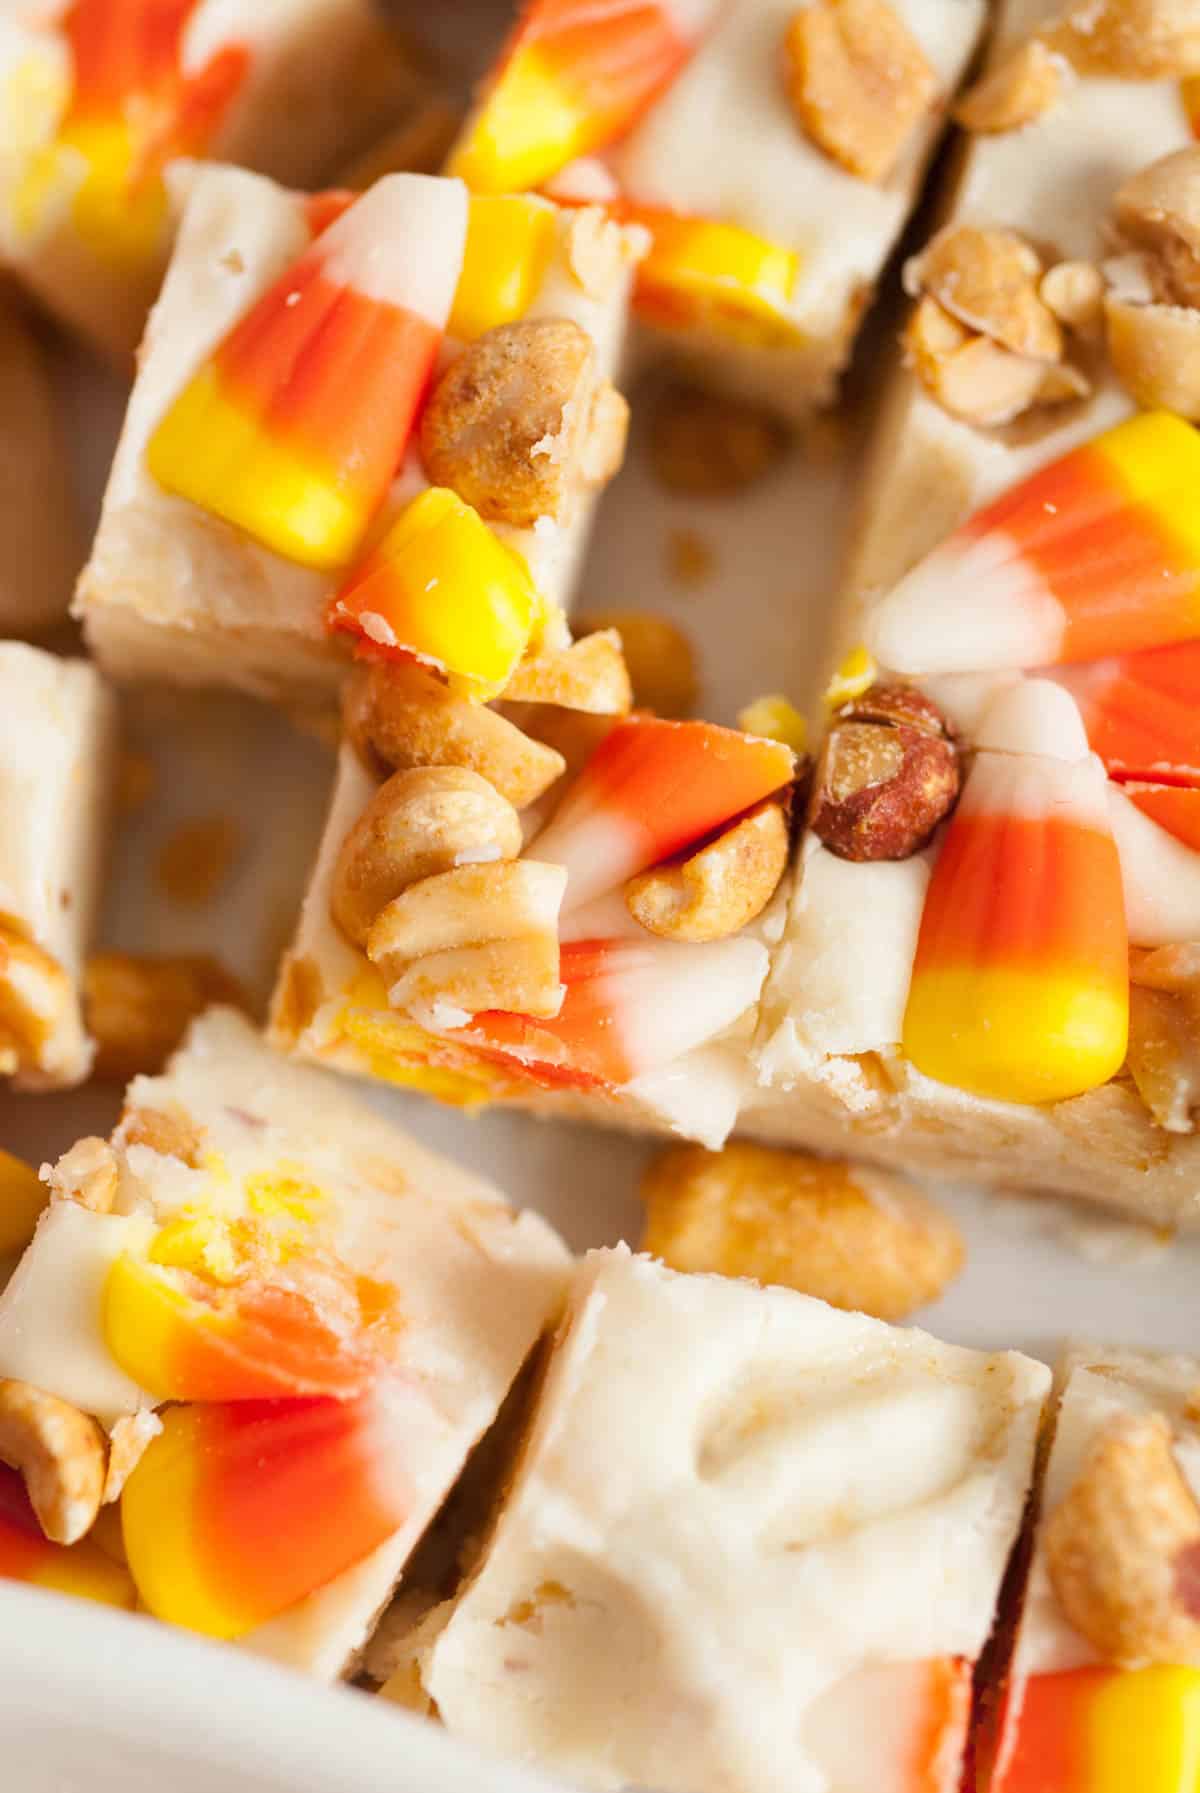 Pieces of candy corn and salted roasted peanuts on top of creamy fudge squares.